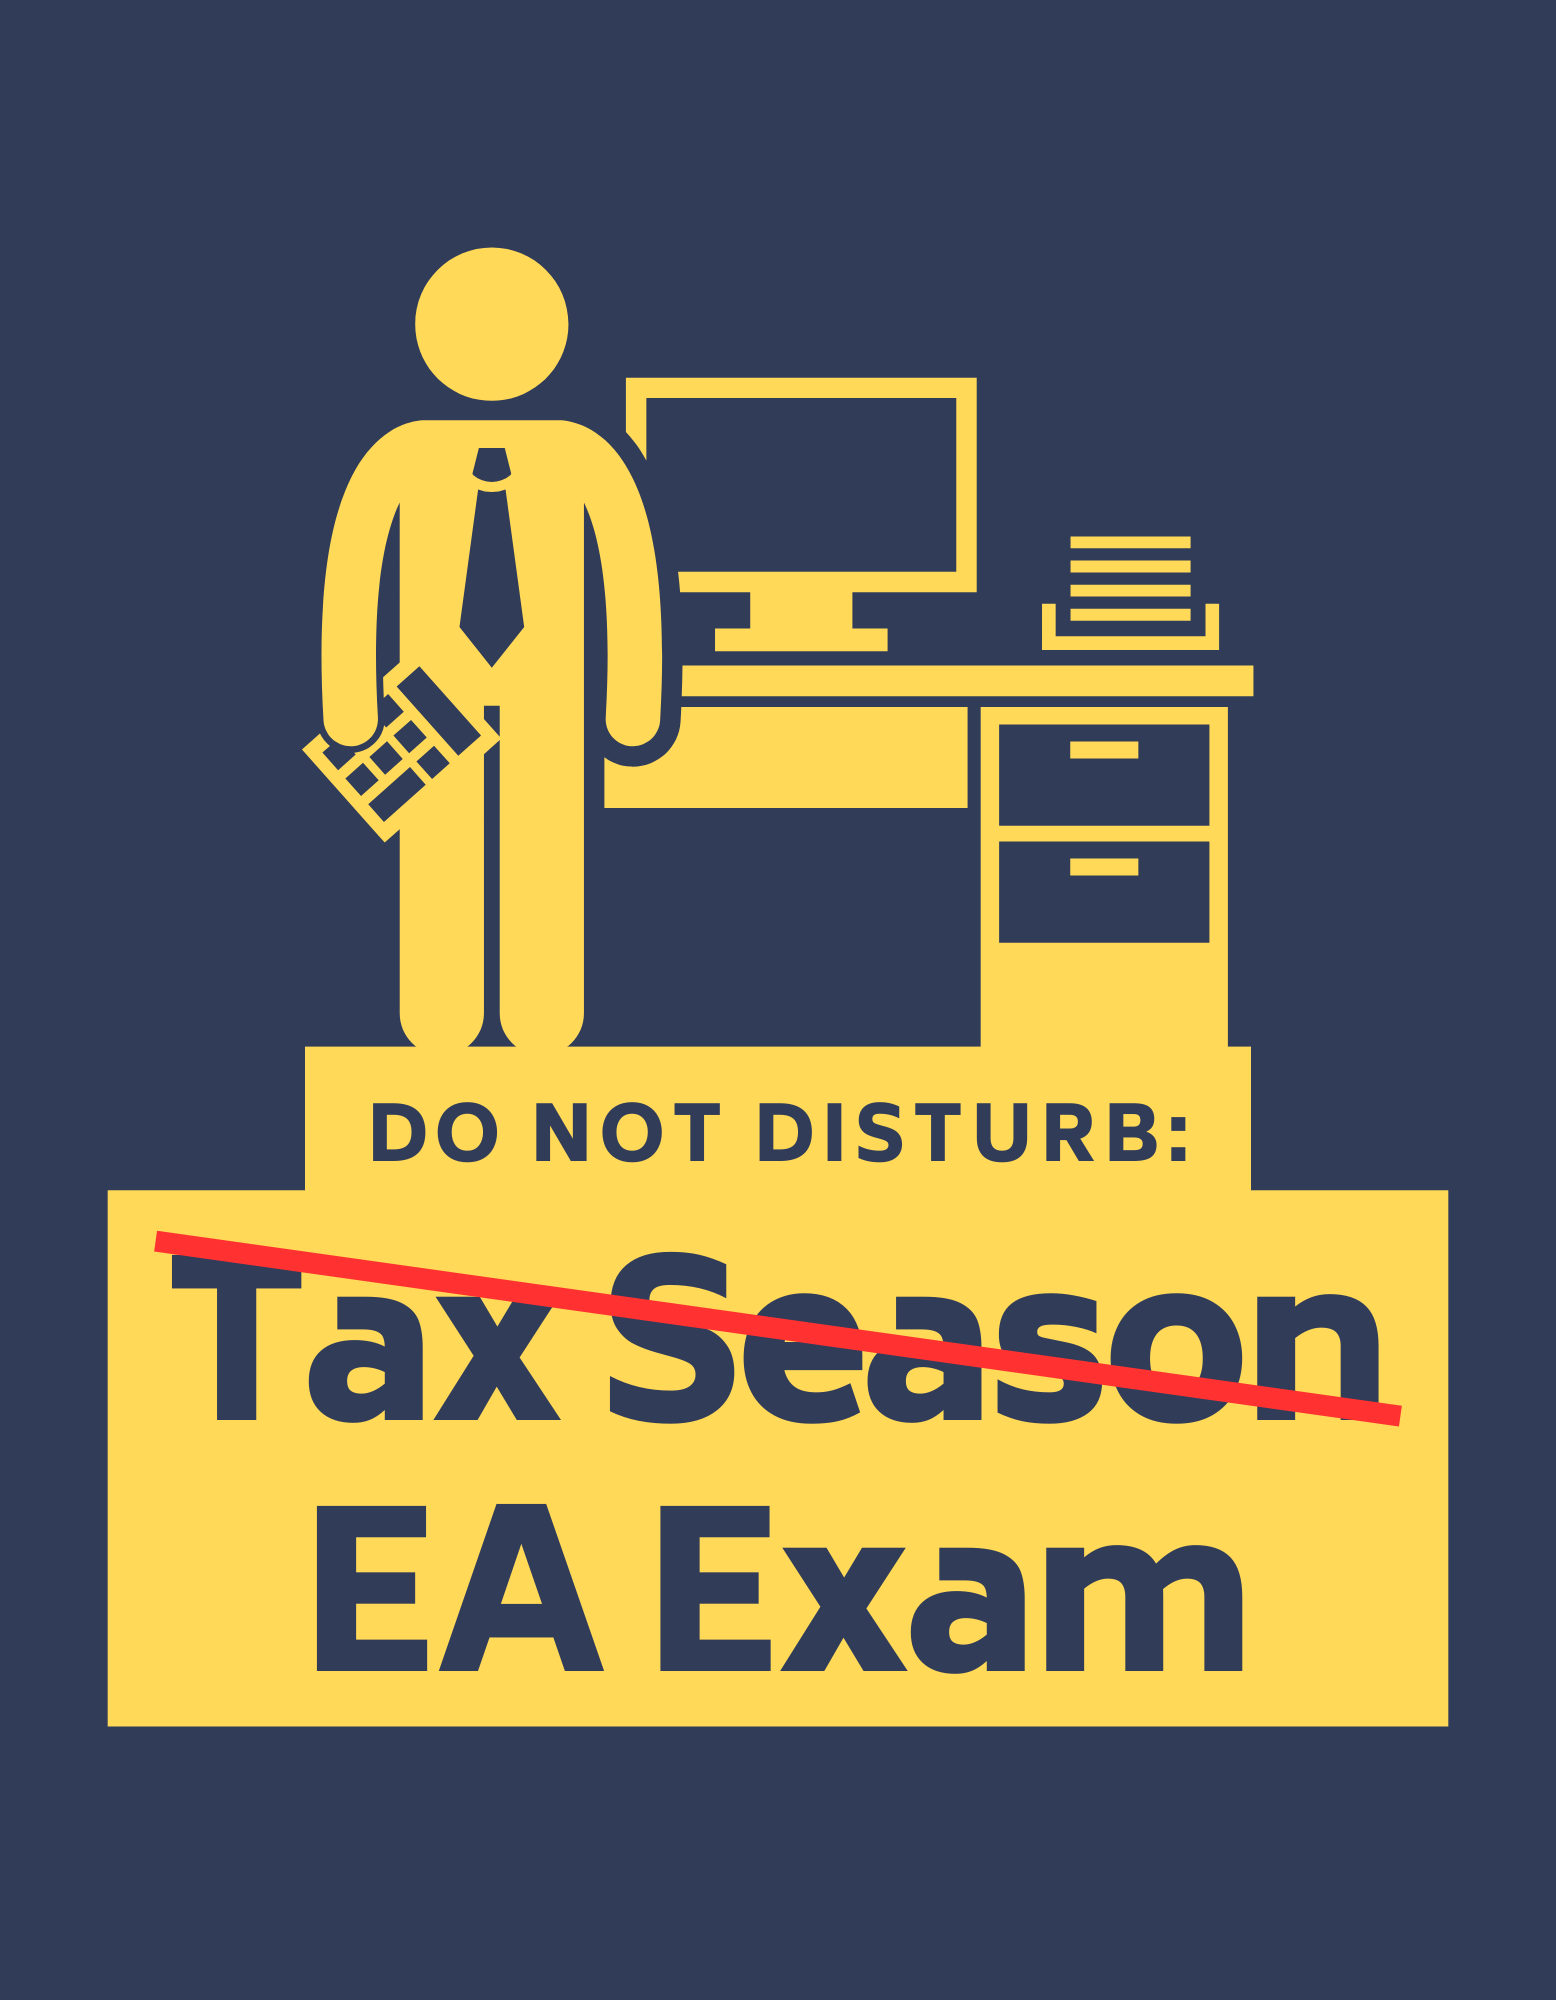 Everything You Need To Know To Easily Pass The IRS Enrolled Agent Exam - Part 1 Individuals